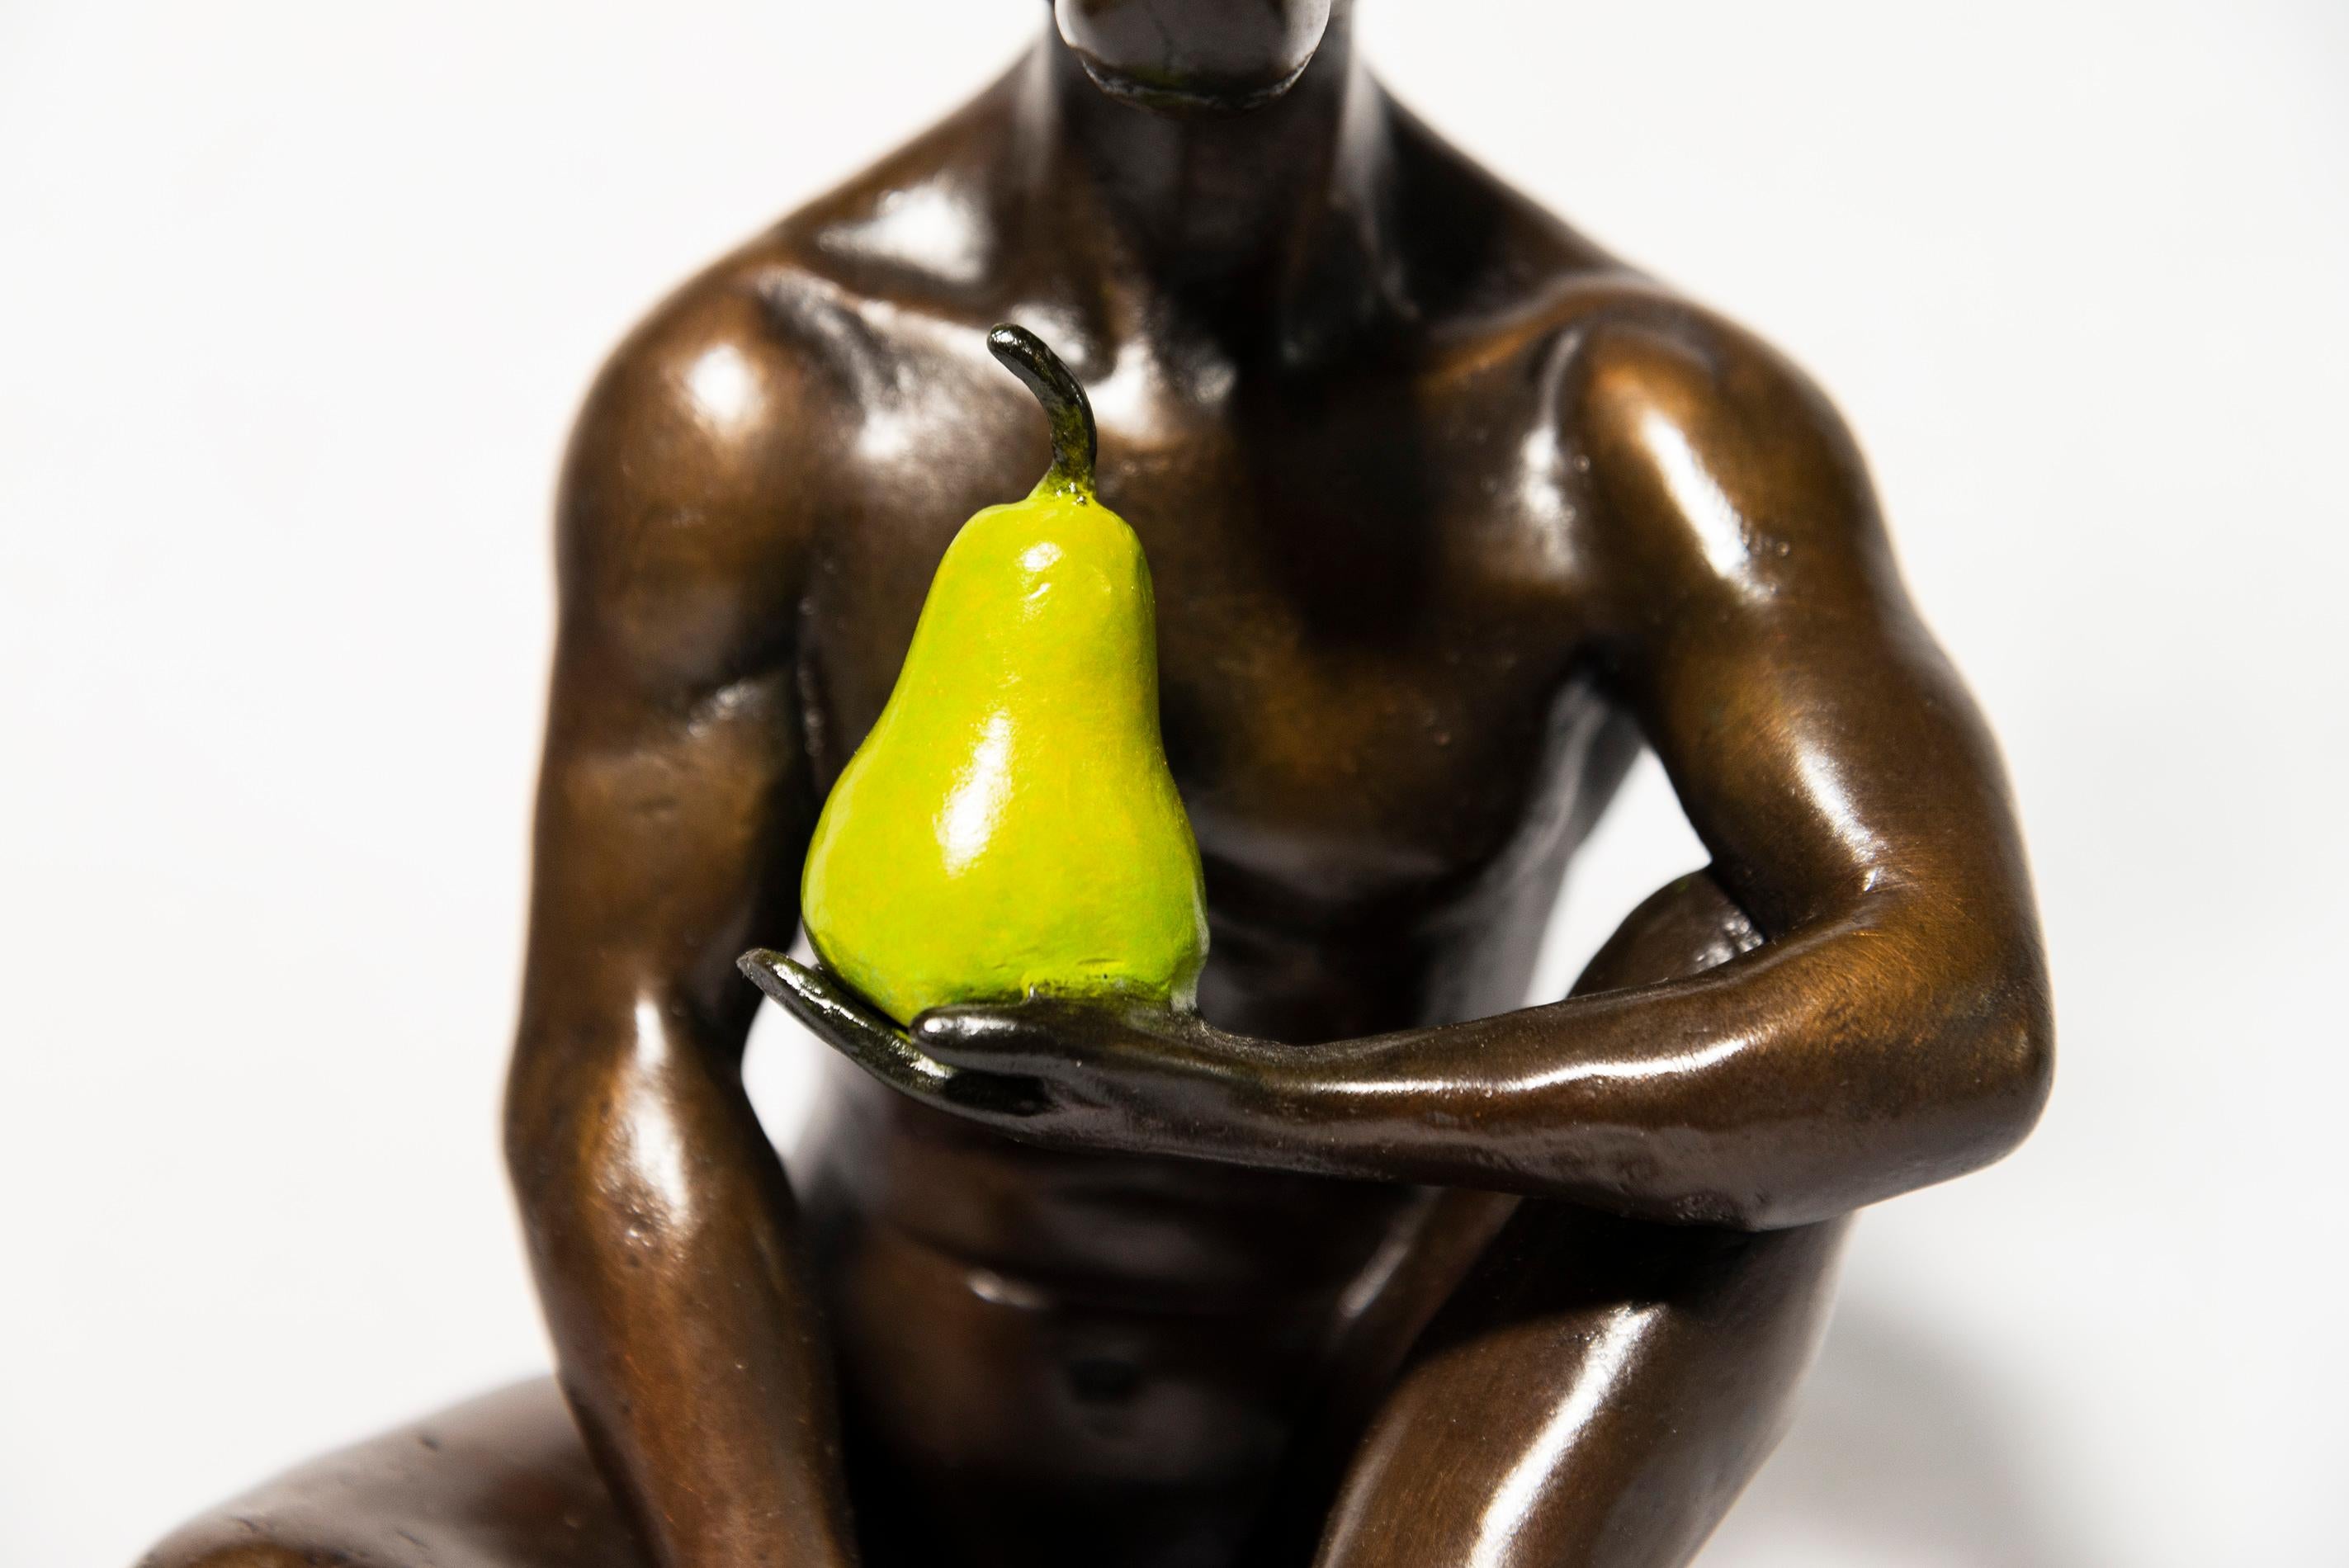 Clutching a pear, an ancient symbol of abundance, longevity and fertility, a deer man…half animal, half human is one of a new series of tabletop sculptures by Gillie and Marc. Cast in bronze, the handsome deer man is seated, legs crossed, a bright